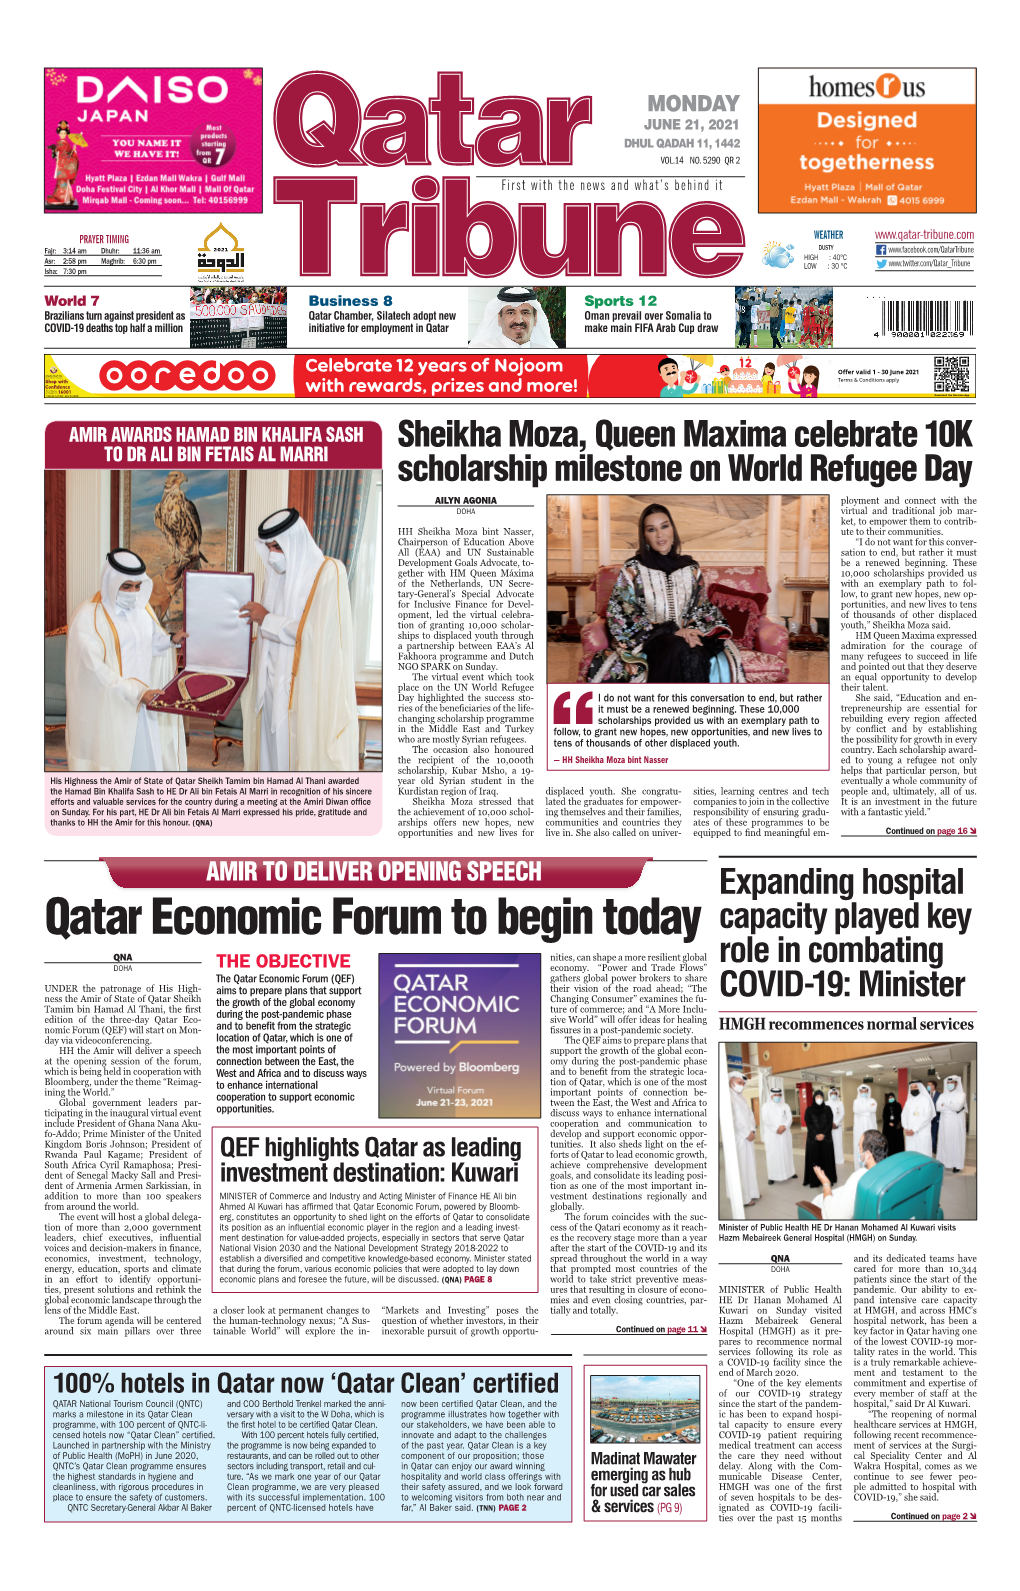 Qatar Economic Forum to Begin Today Capacity Played Key QNA Nities, Can Shape a More Resilient Global Role in Combating Doha the Objective Economy